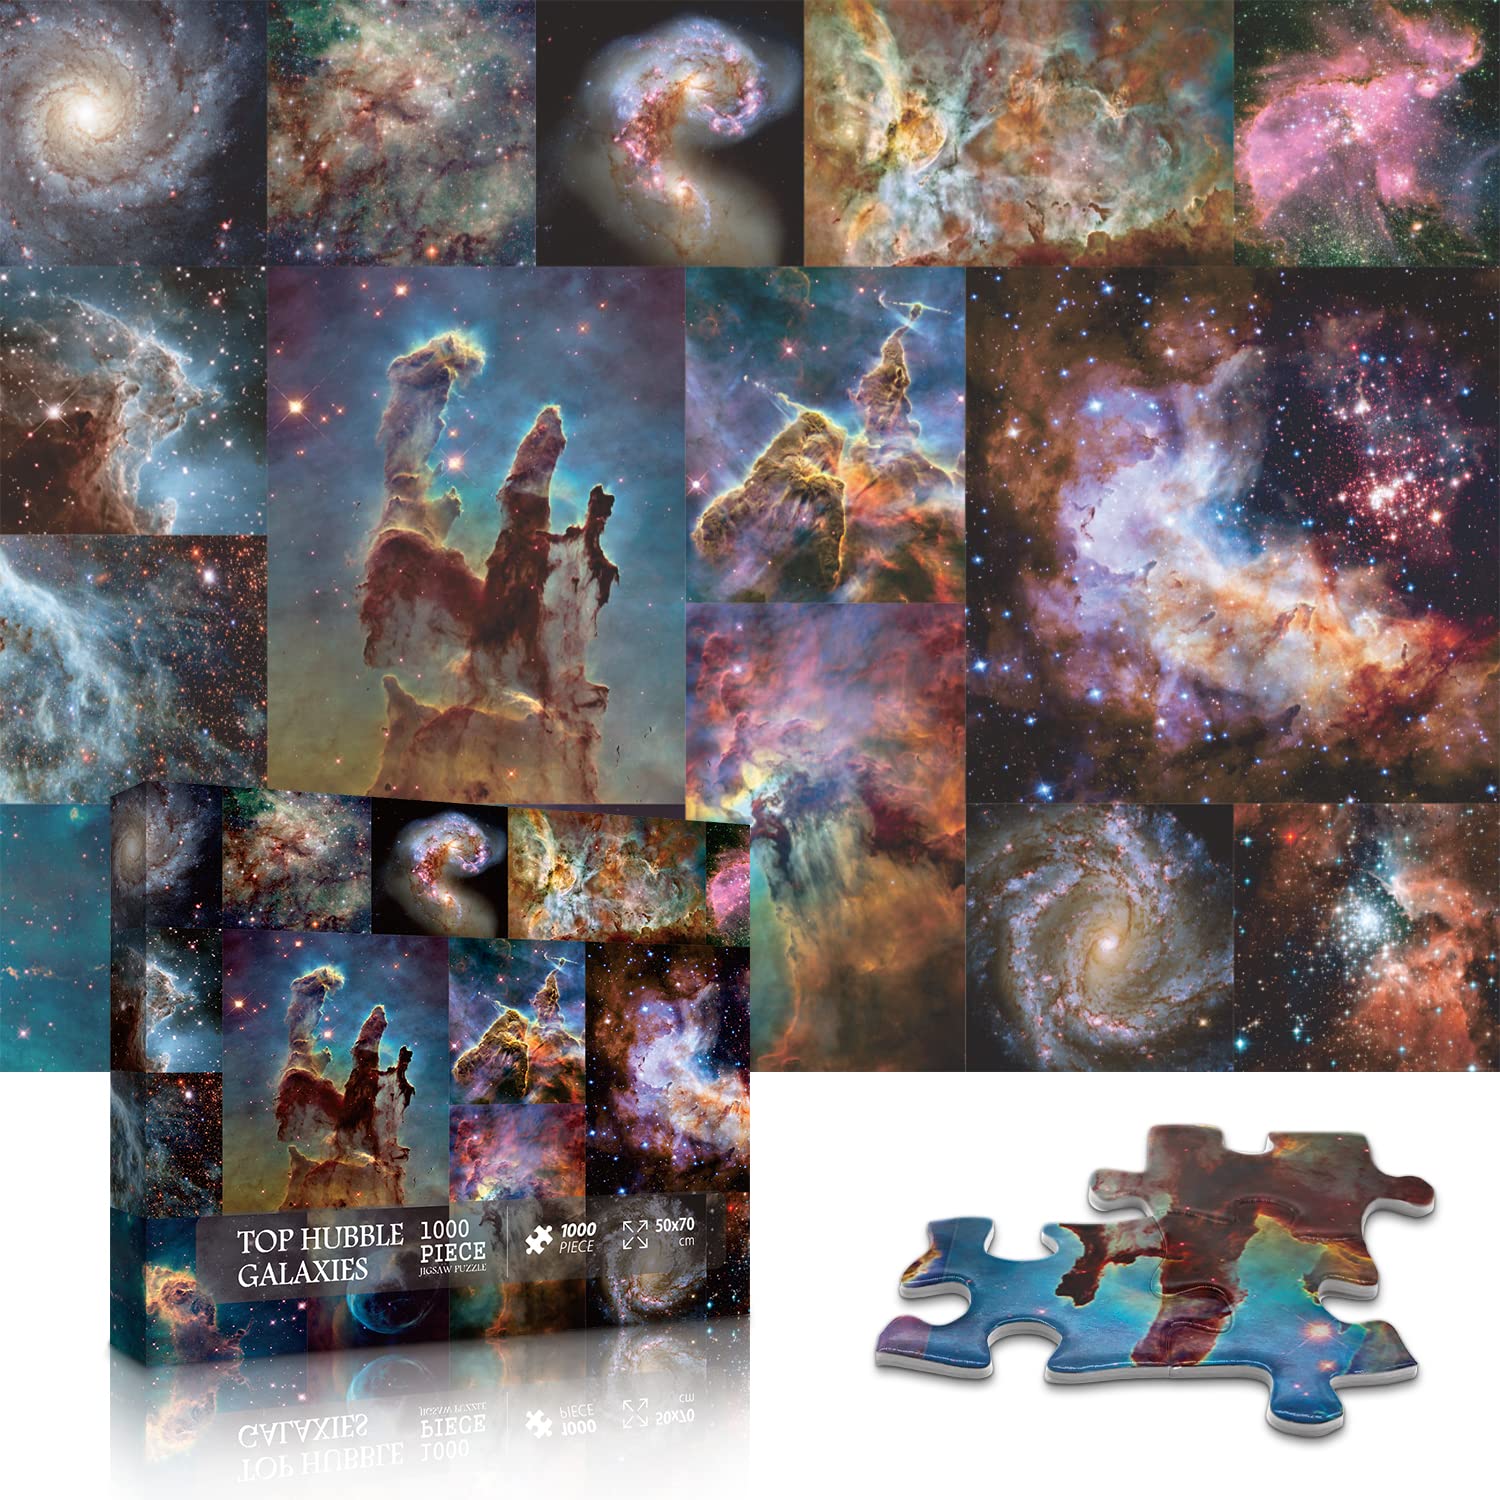 Galactic Centre Space Jigsaw Puzzle 1000 Pieces